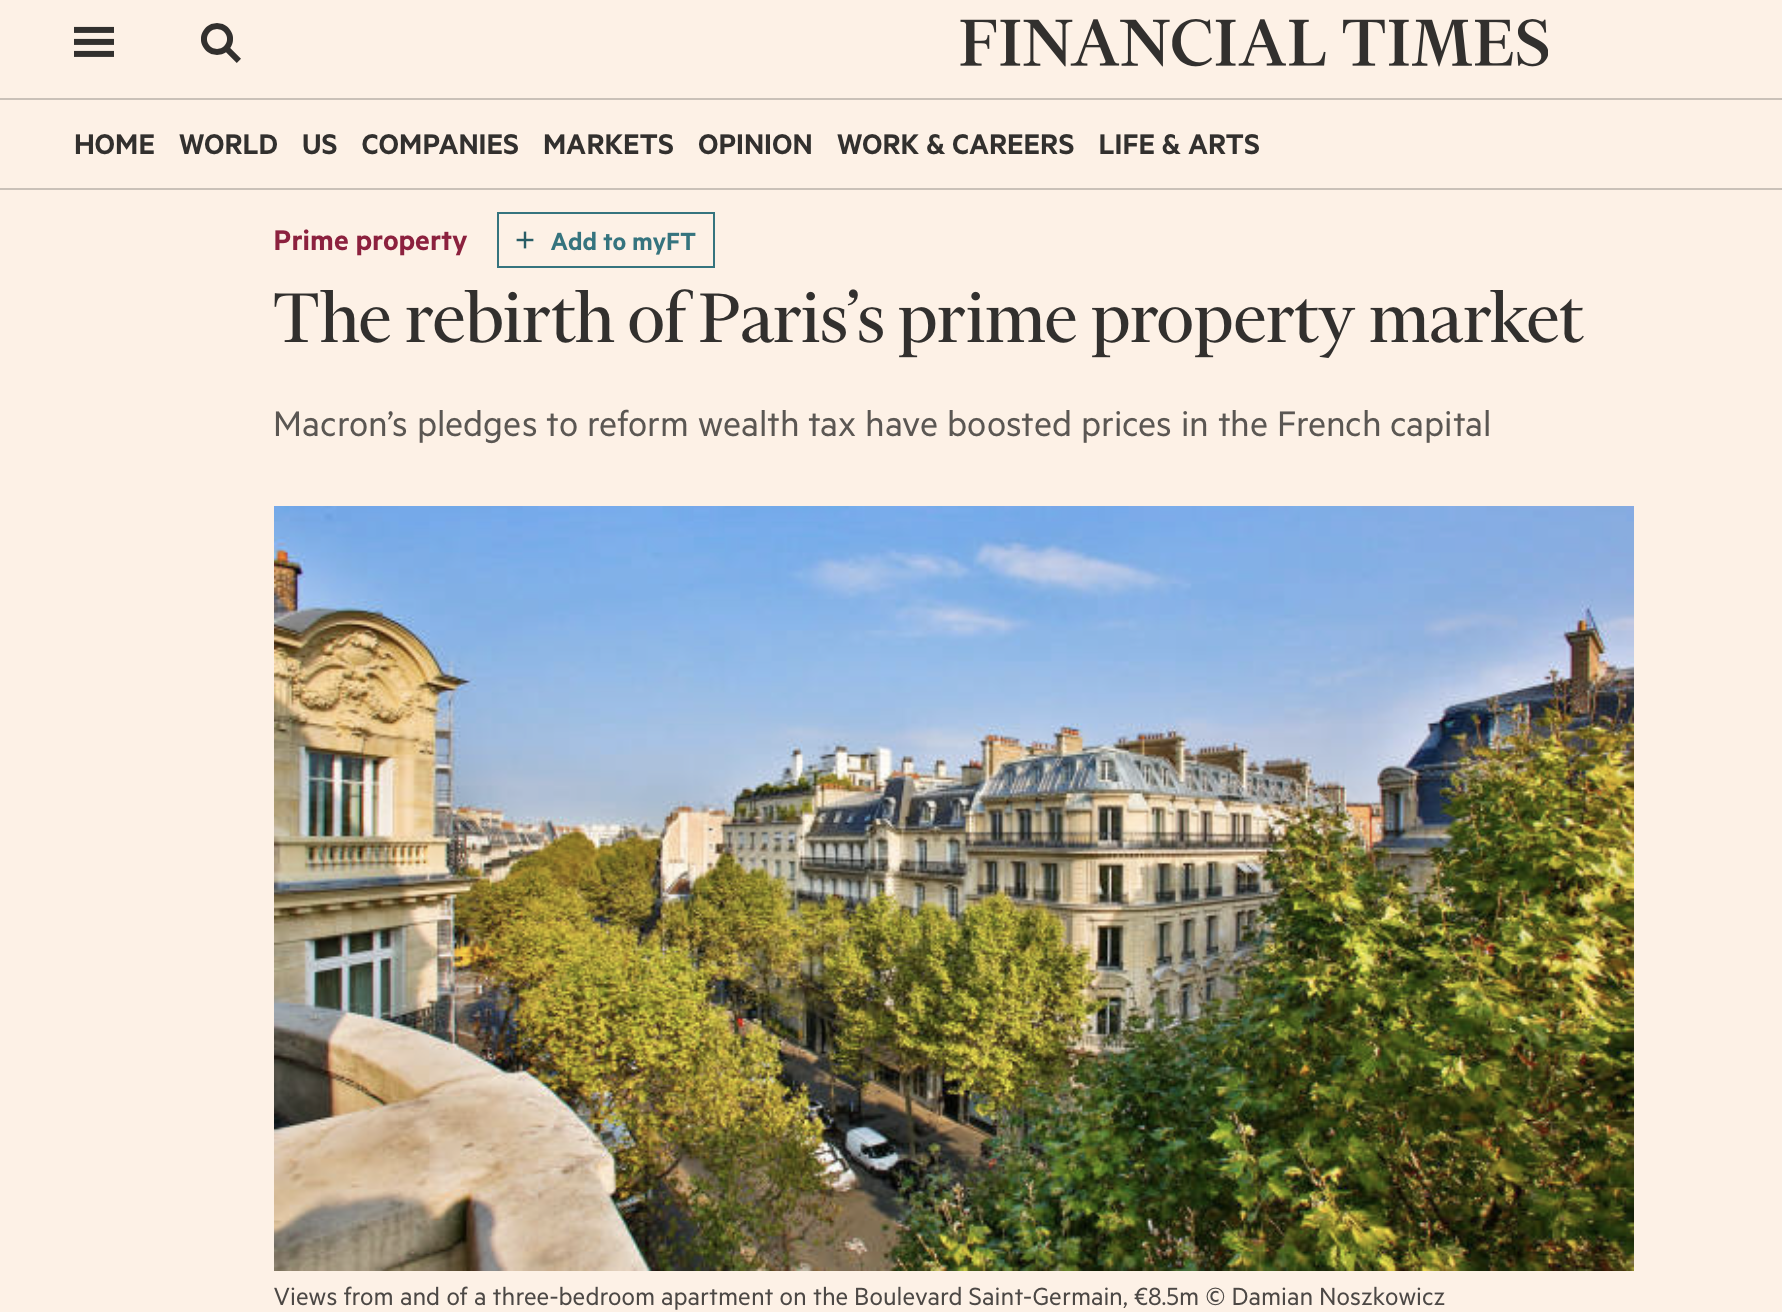 Financial Times – The Rebirth of Paris’s Prime Property Market